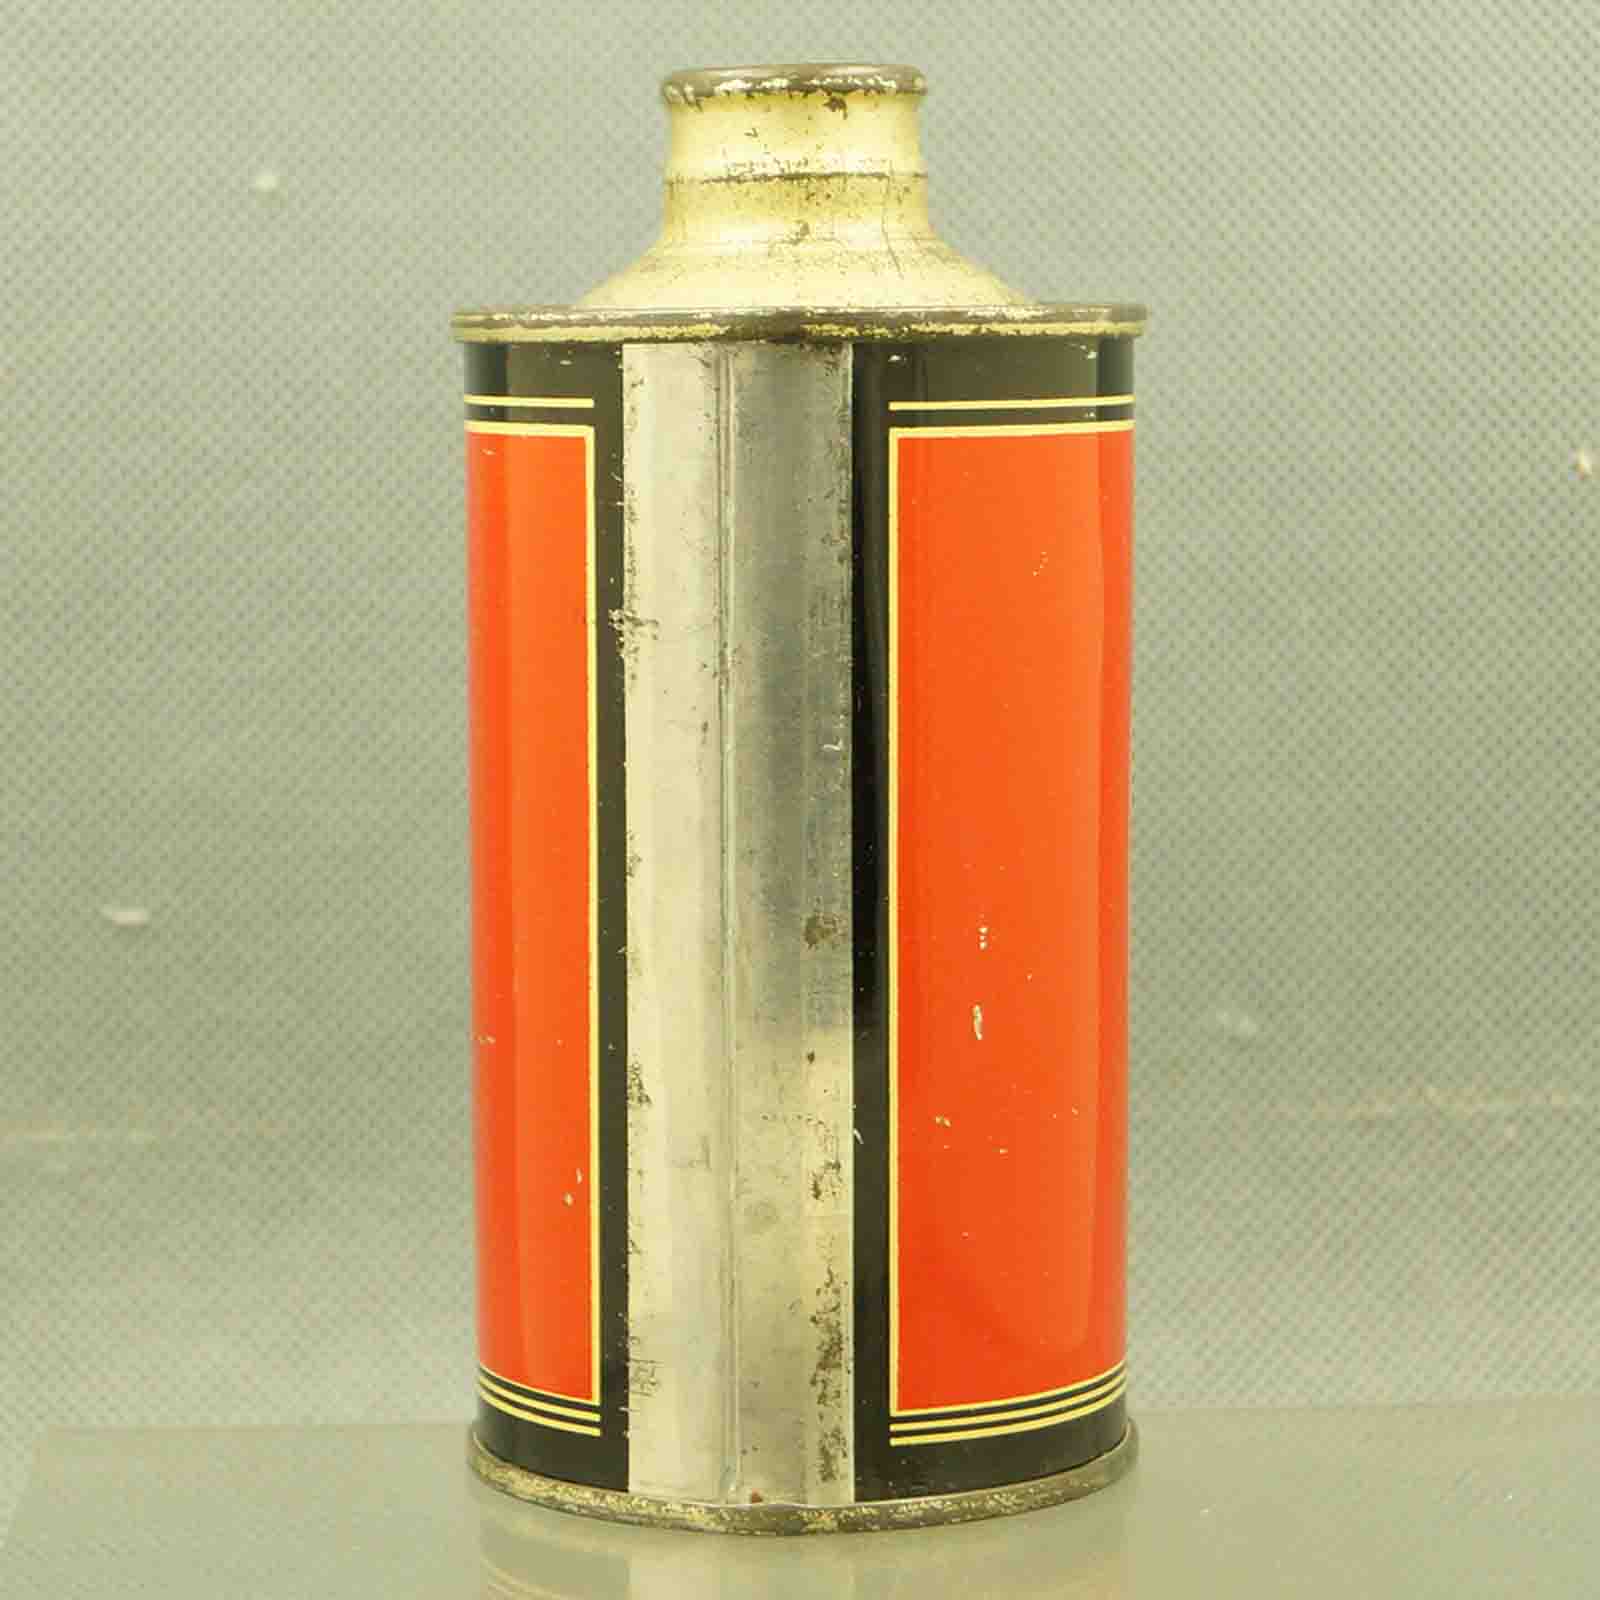 fitzgeralds 162-32 cone top beer can 3